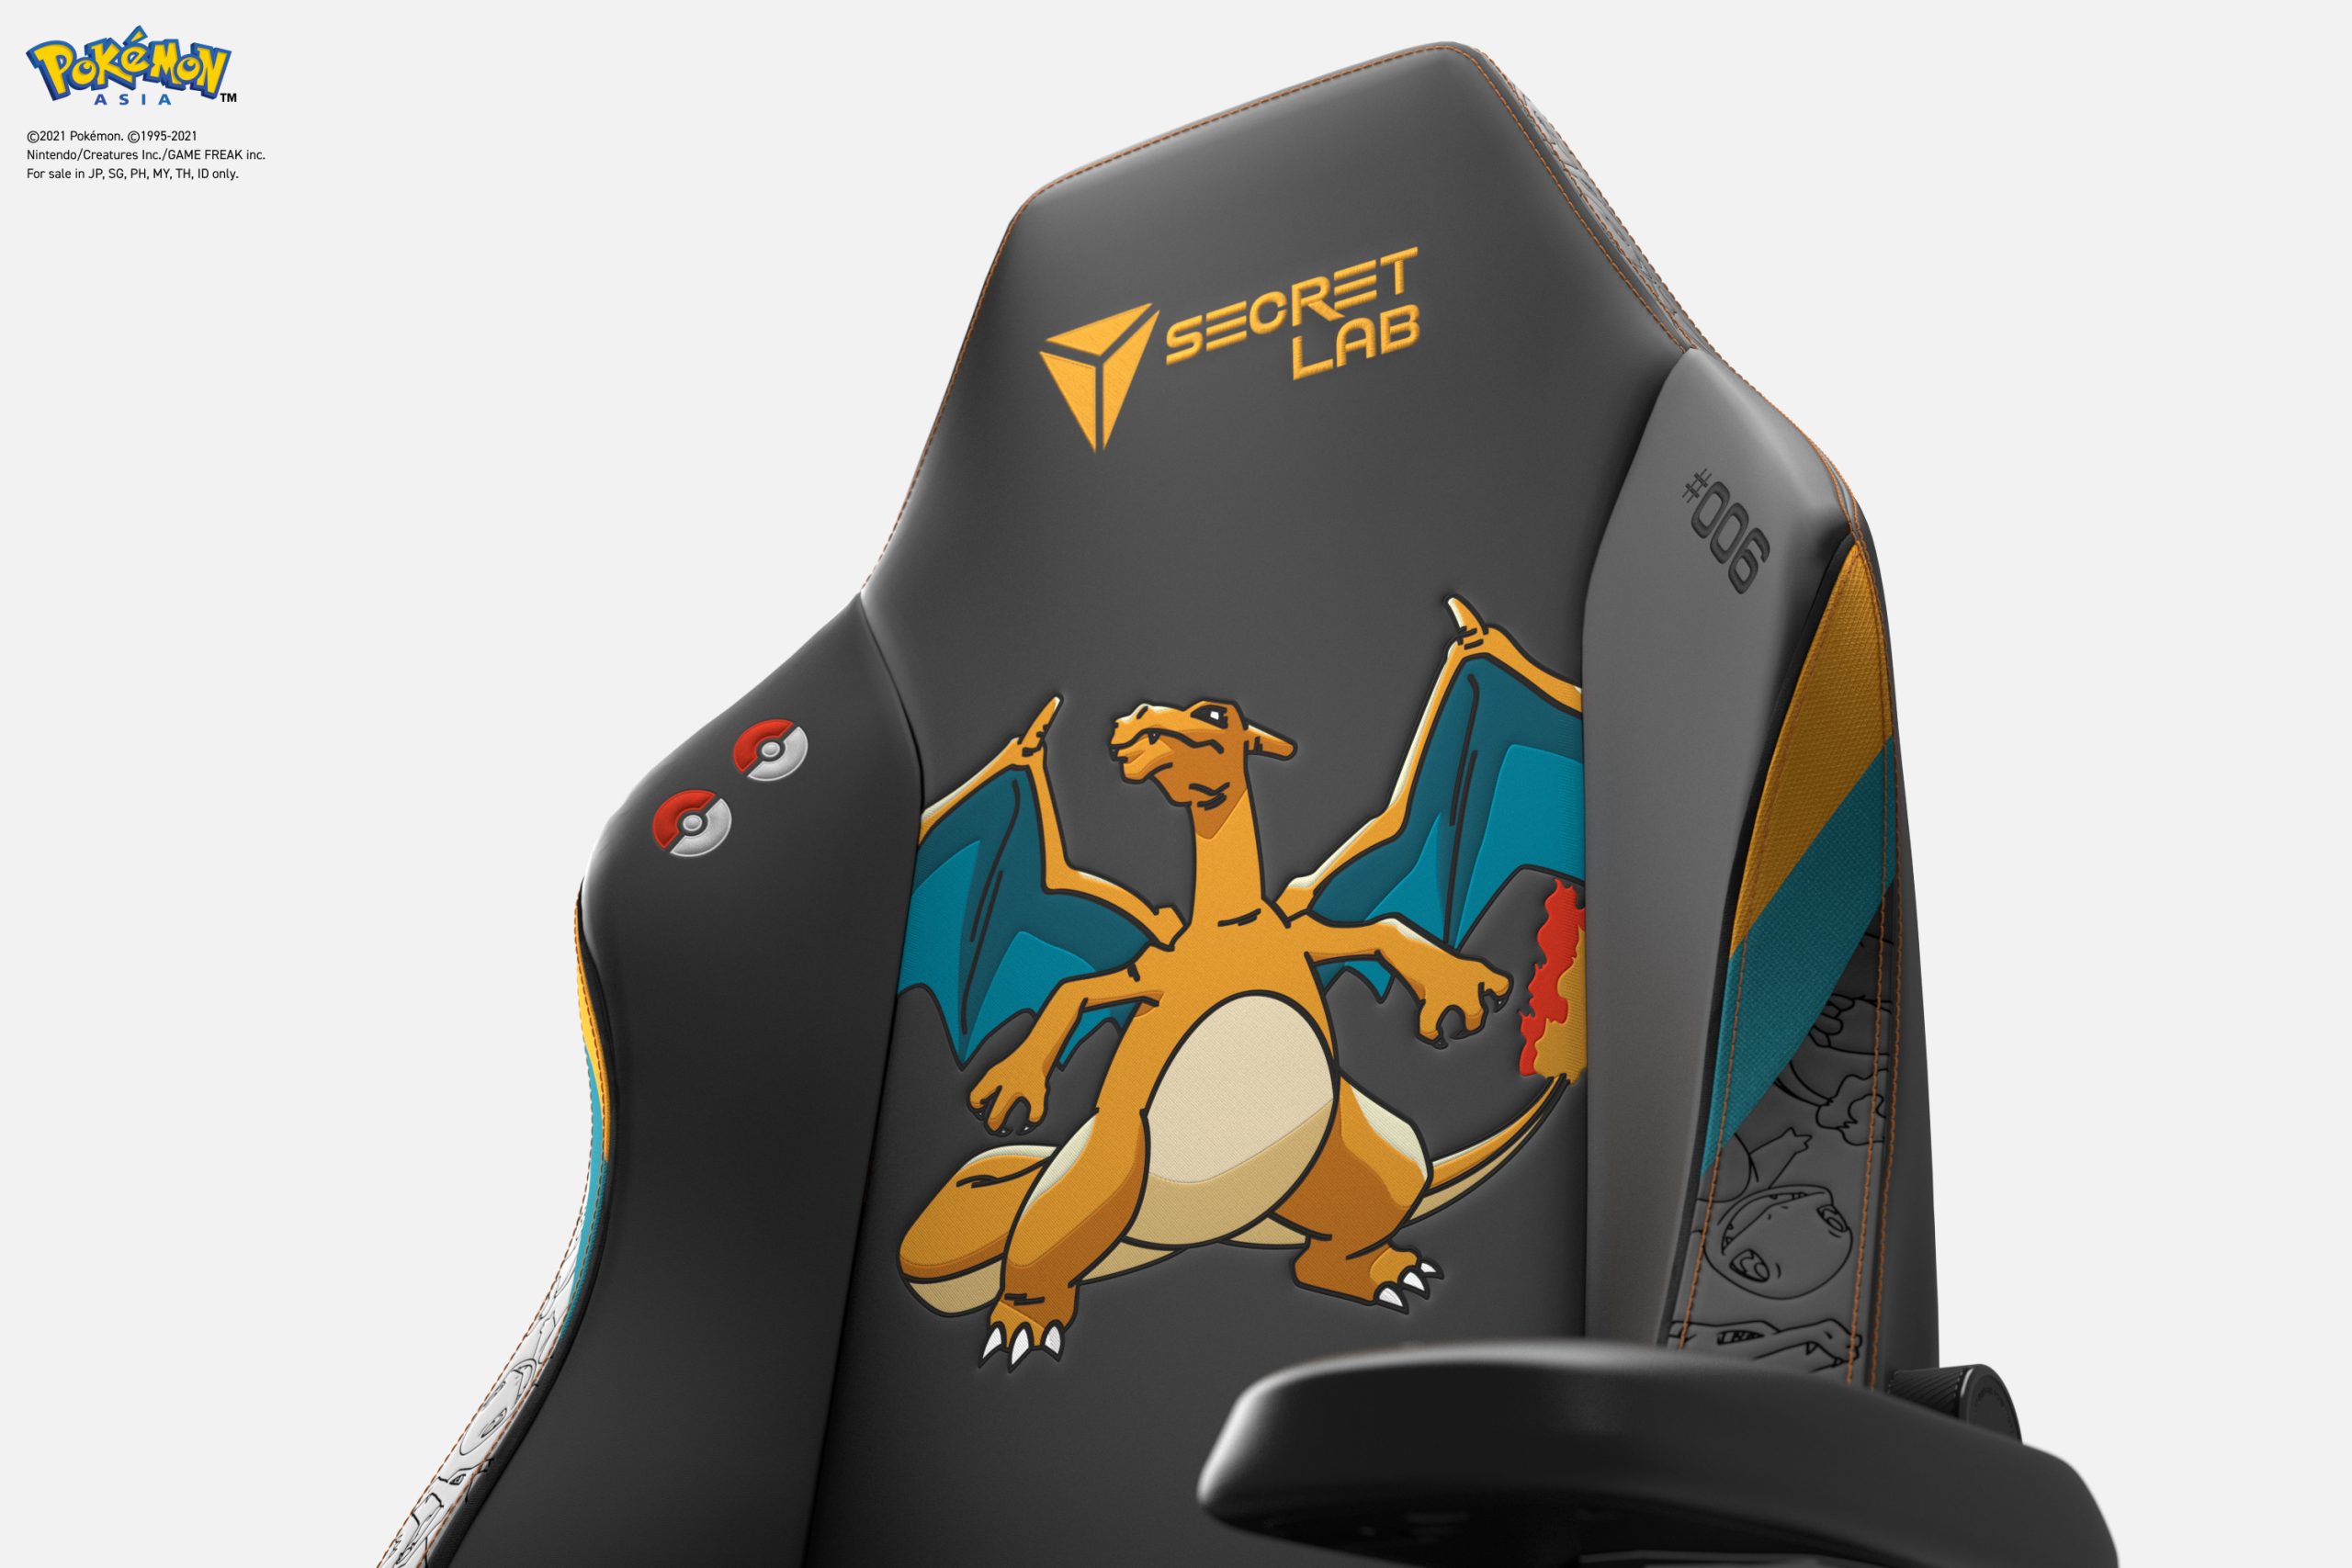 Secret Lab and Pokémon collaborating on limited edition chairs